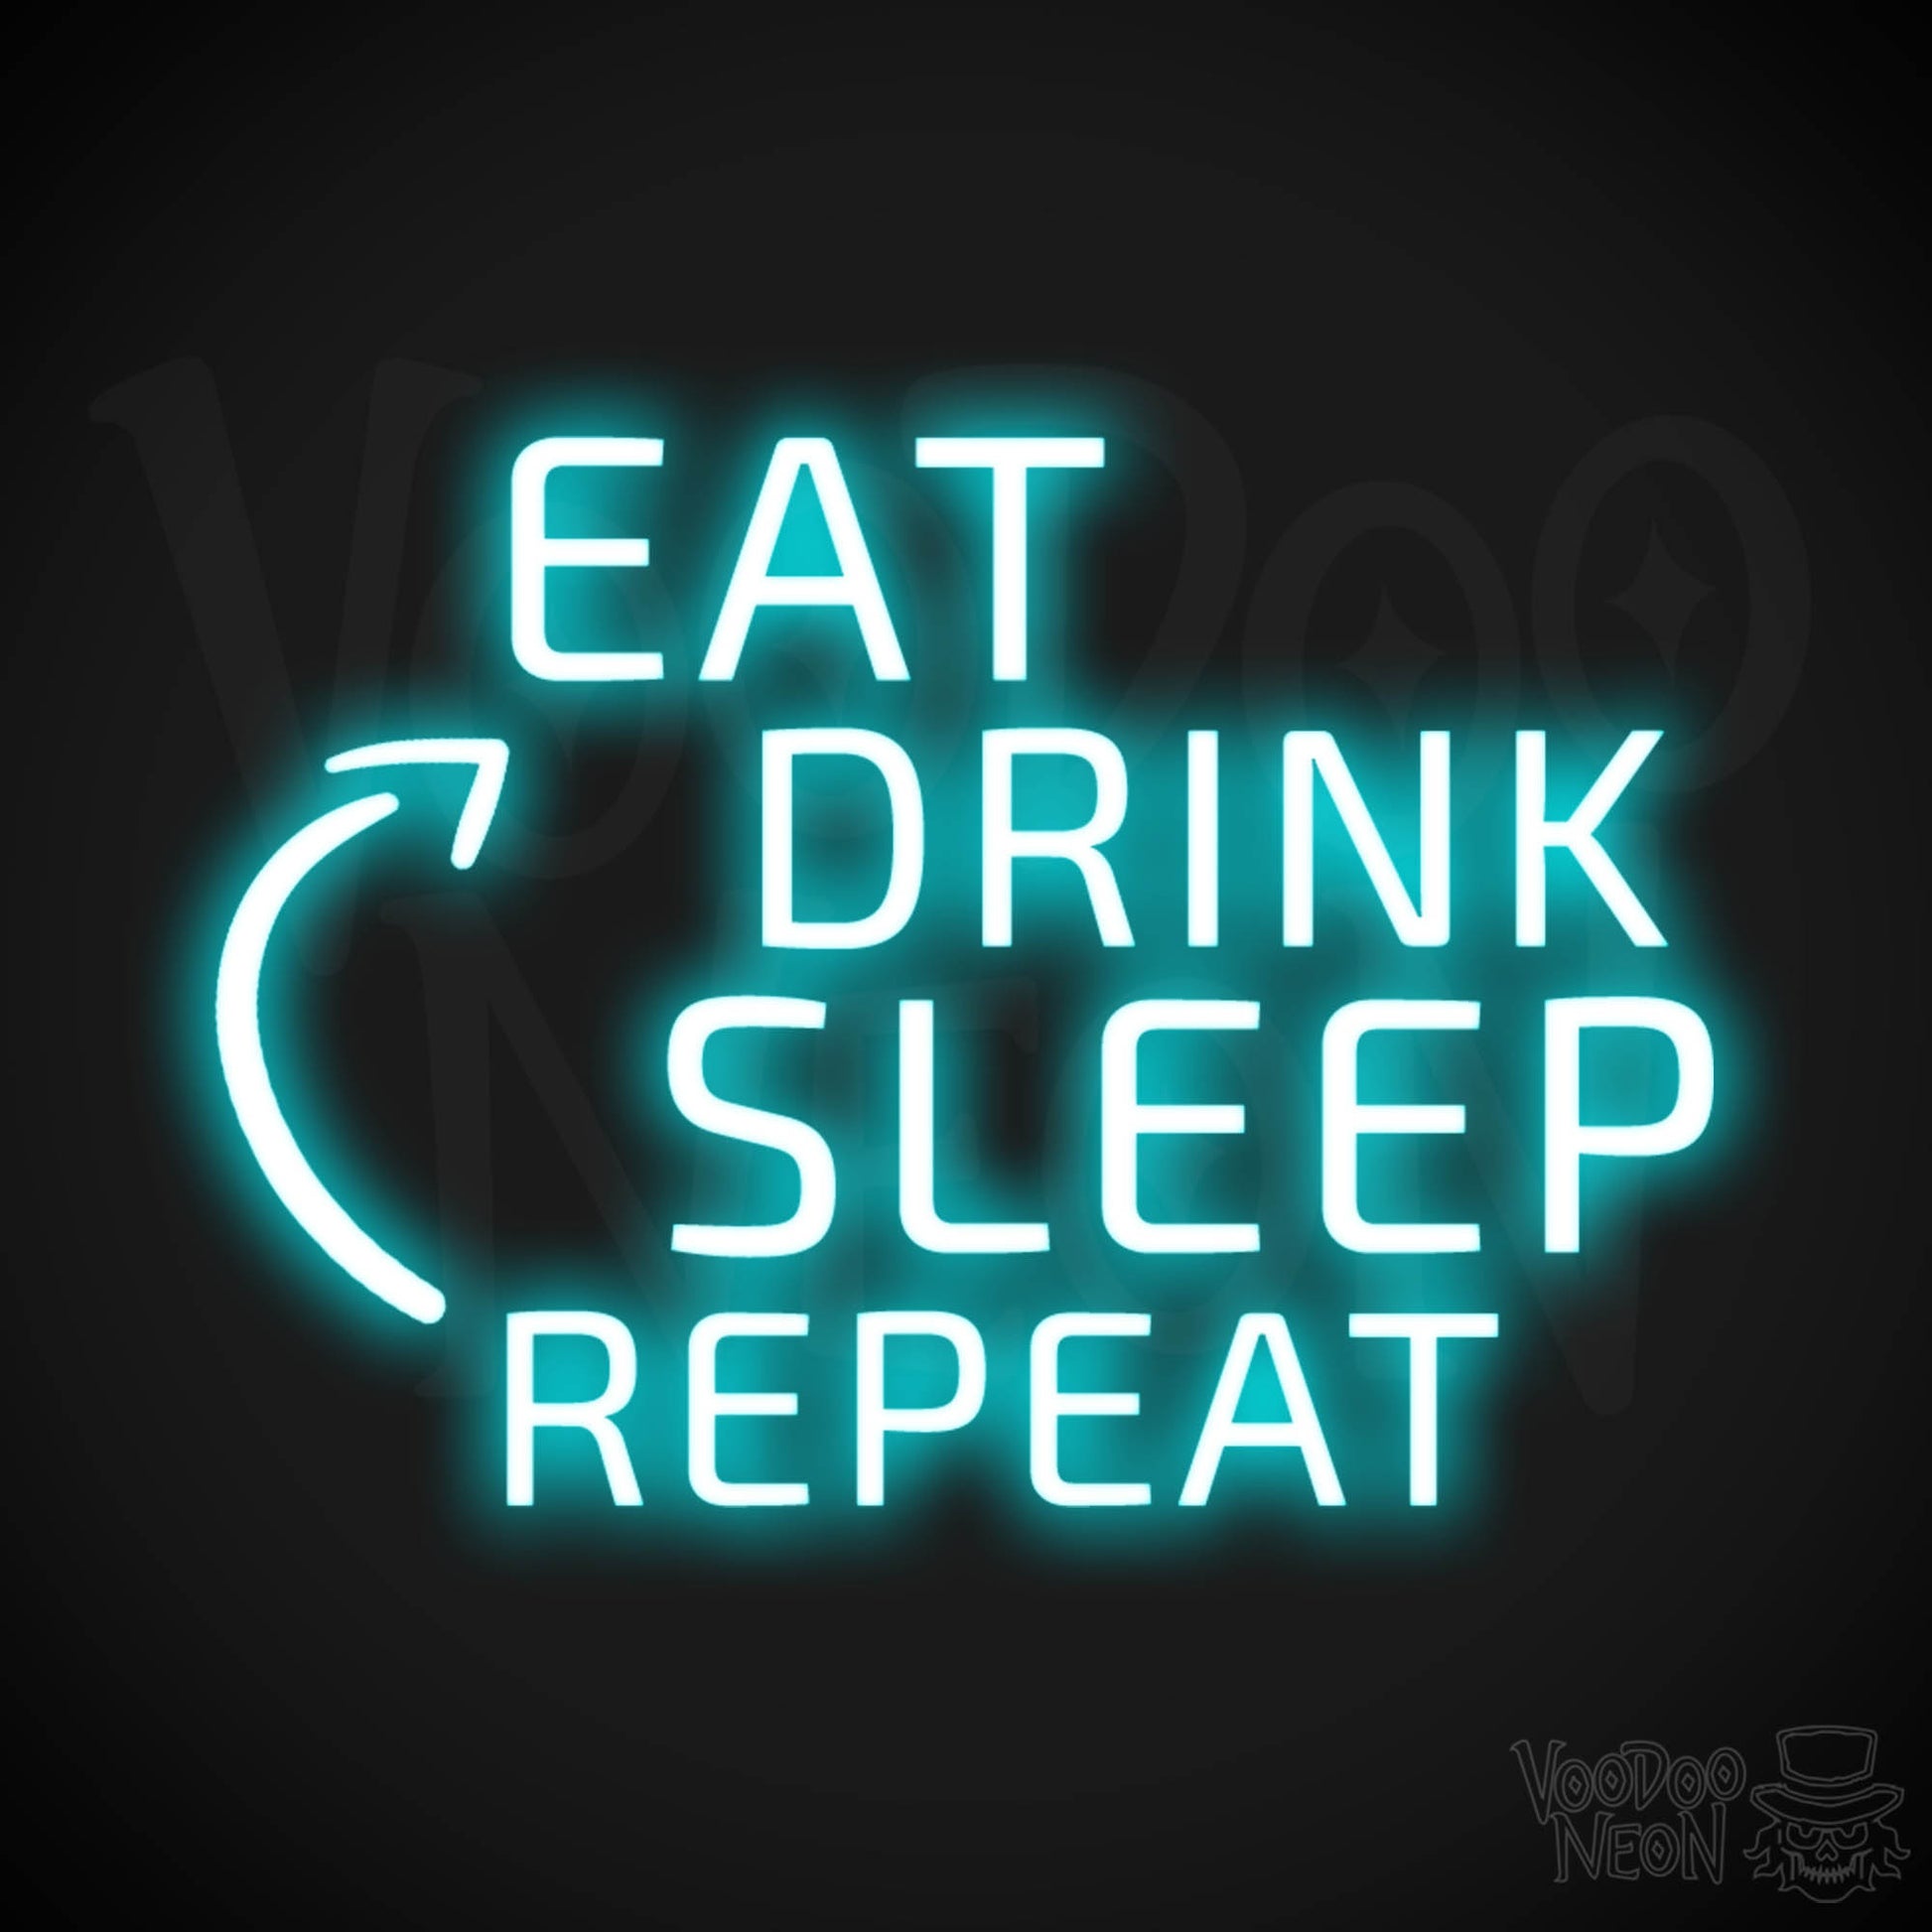 Eat Drink Sleep Repeat Neon Sign - Eat Drink Sleep Repeat Sign - Color Ice Blue